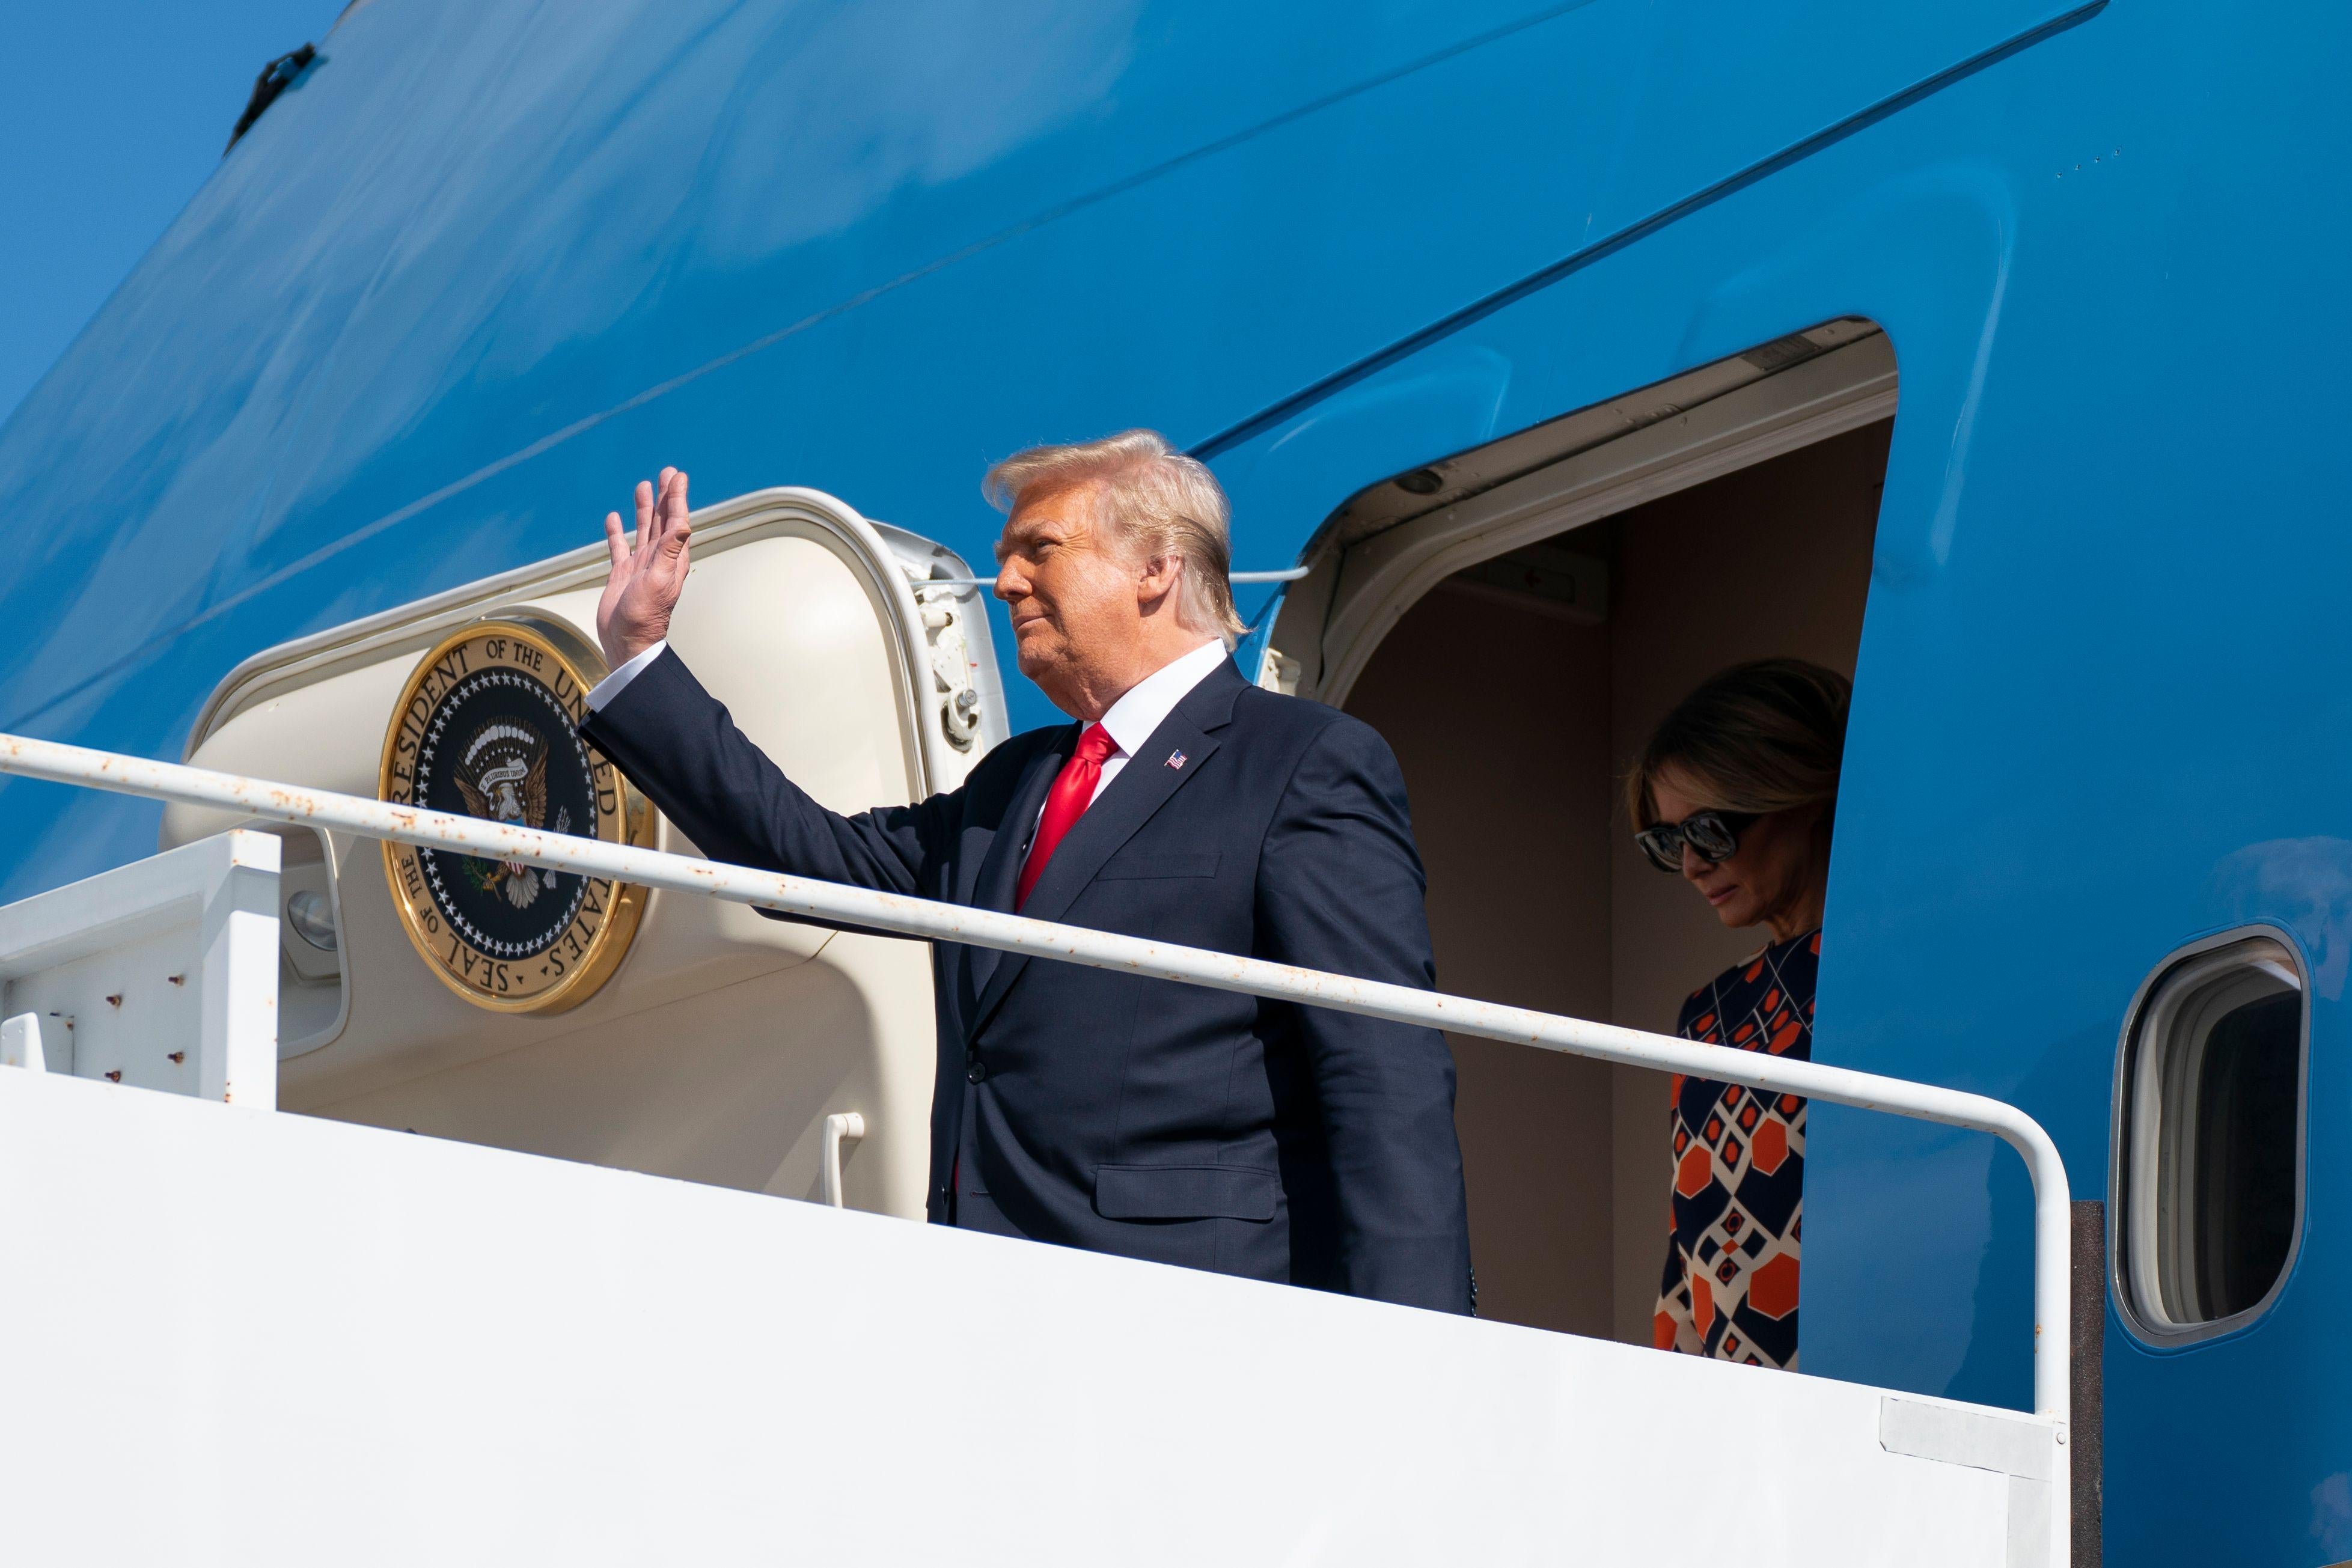 Donald Trump waves from the door of Air Force One.